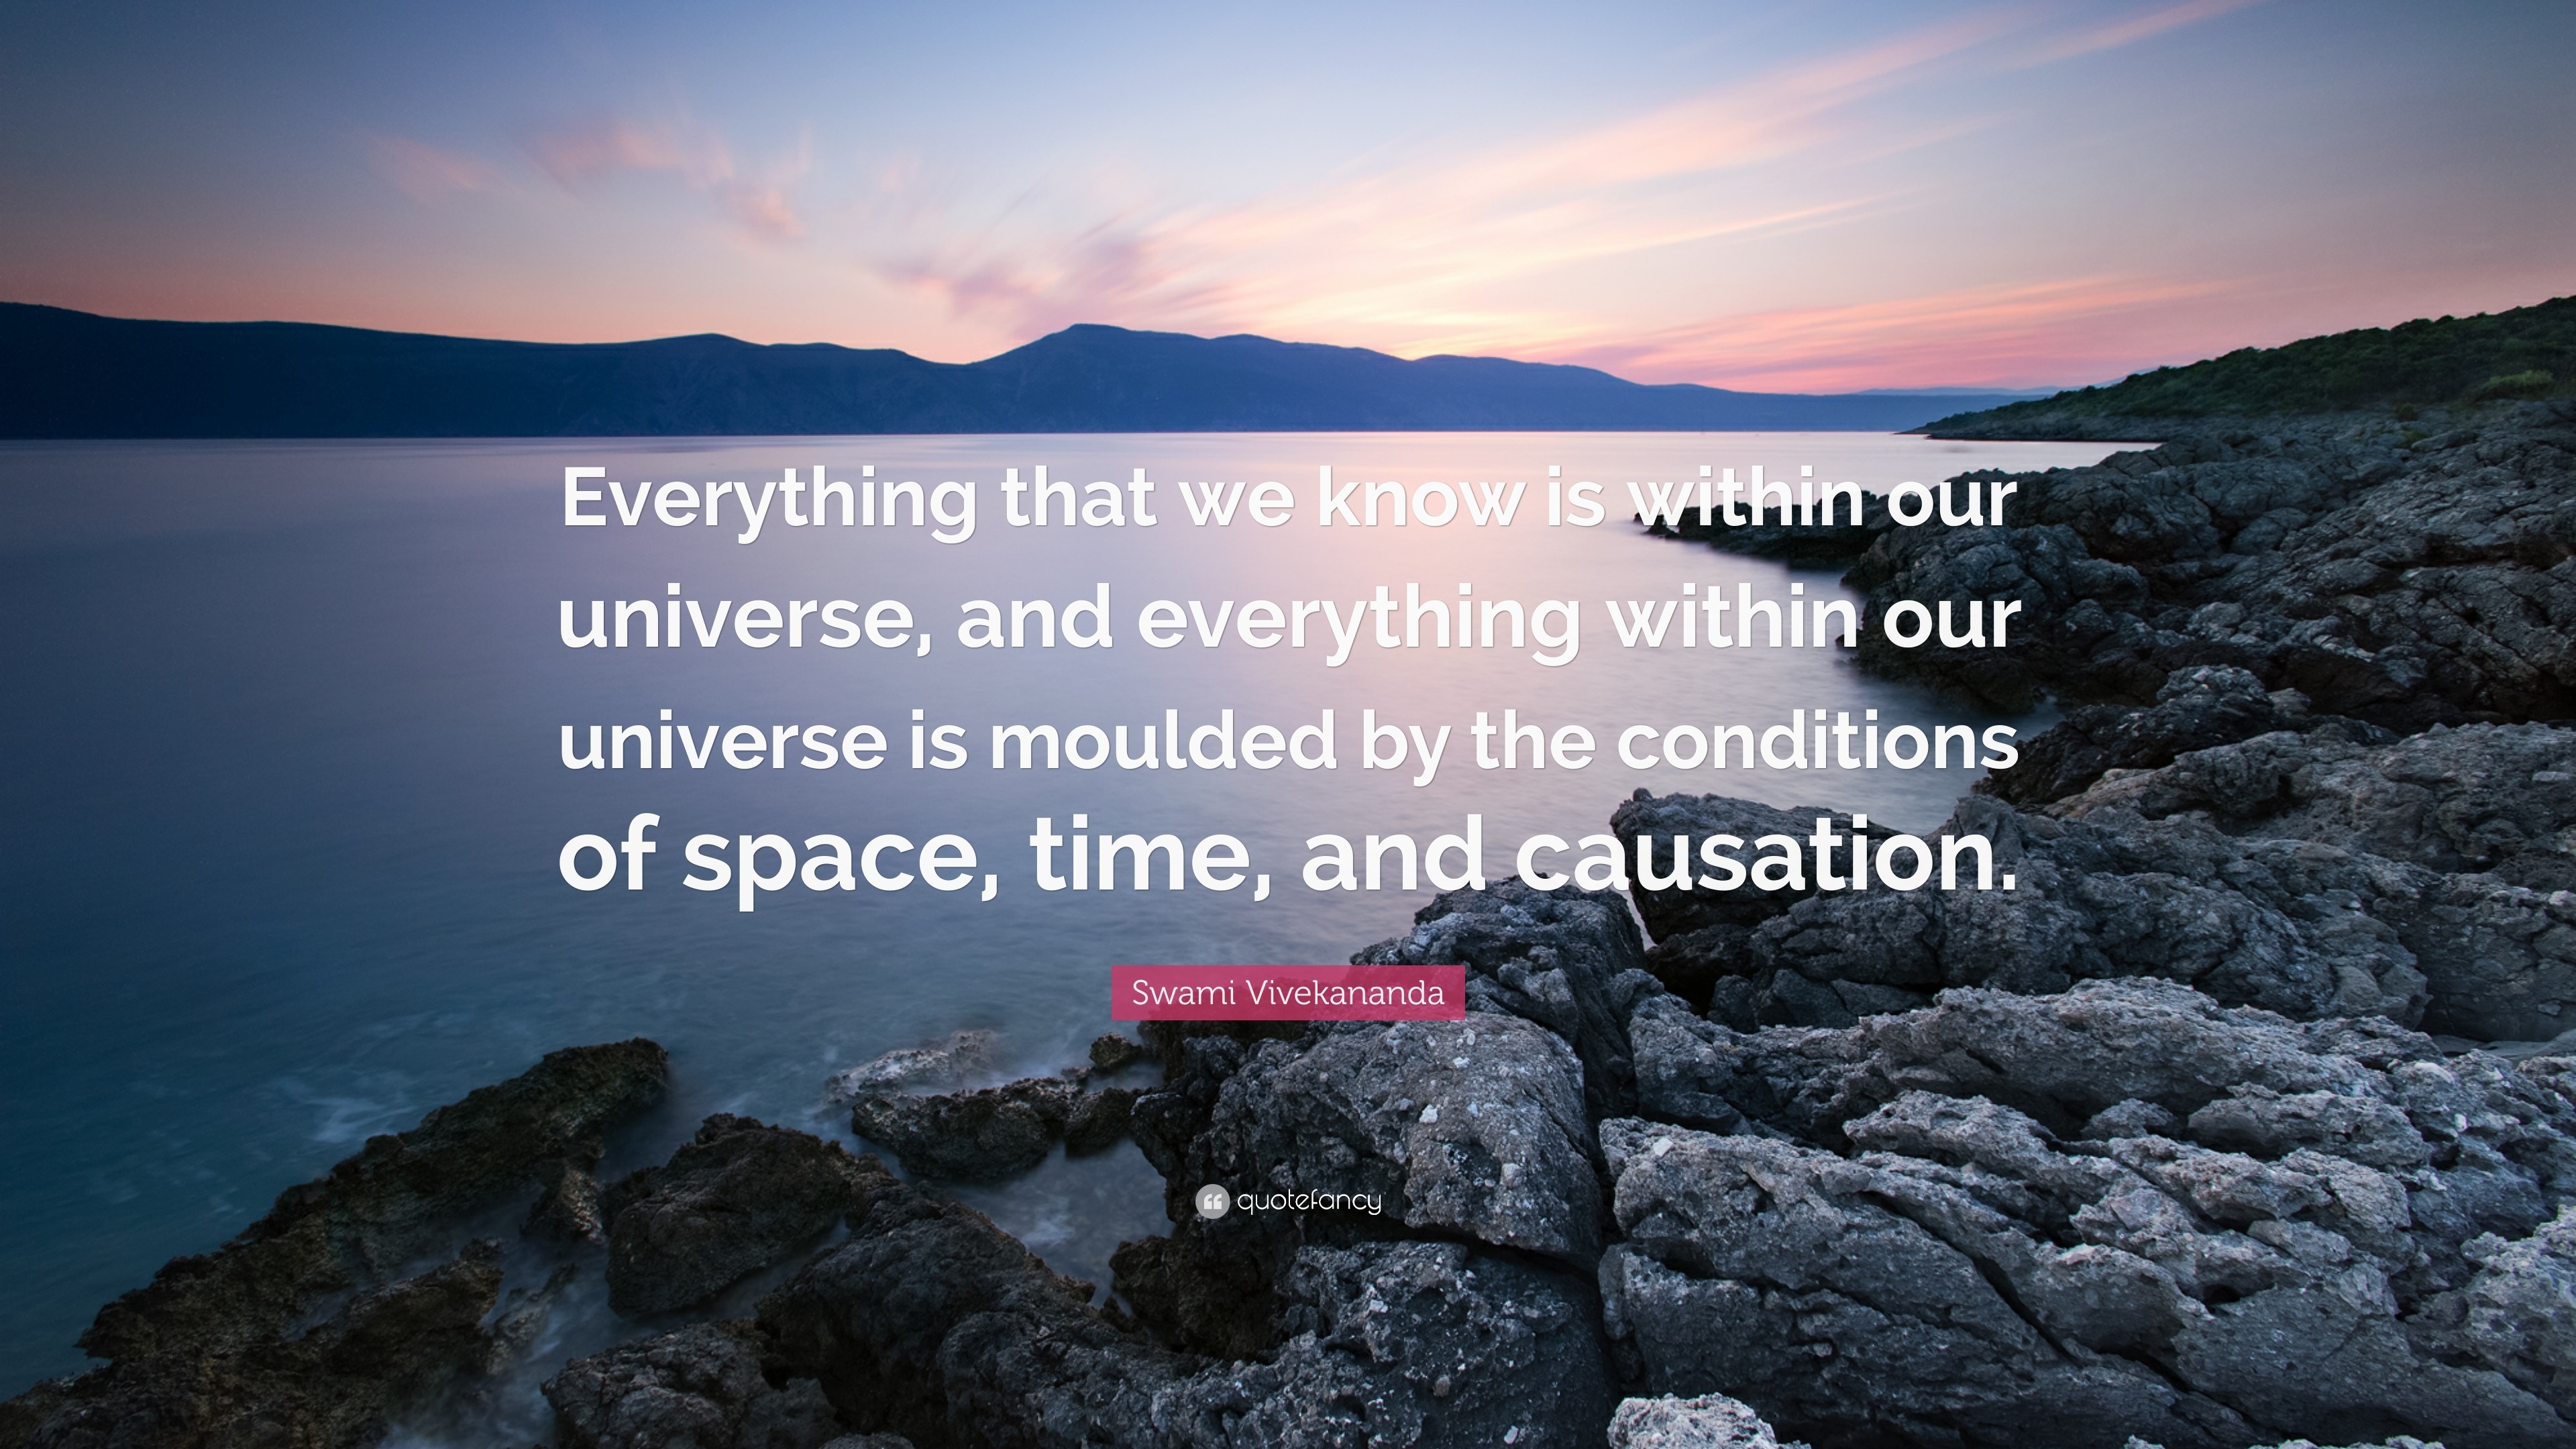 Swami Vivekananda Quote: “Everything that we know is within our ...